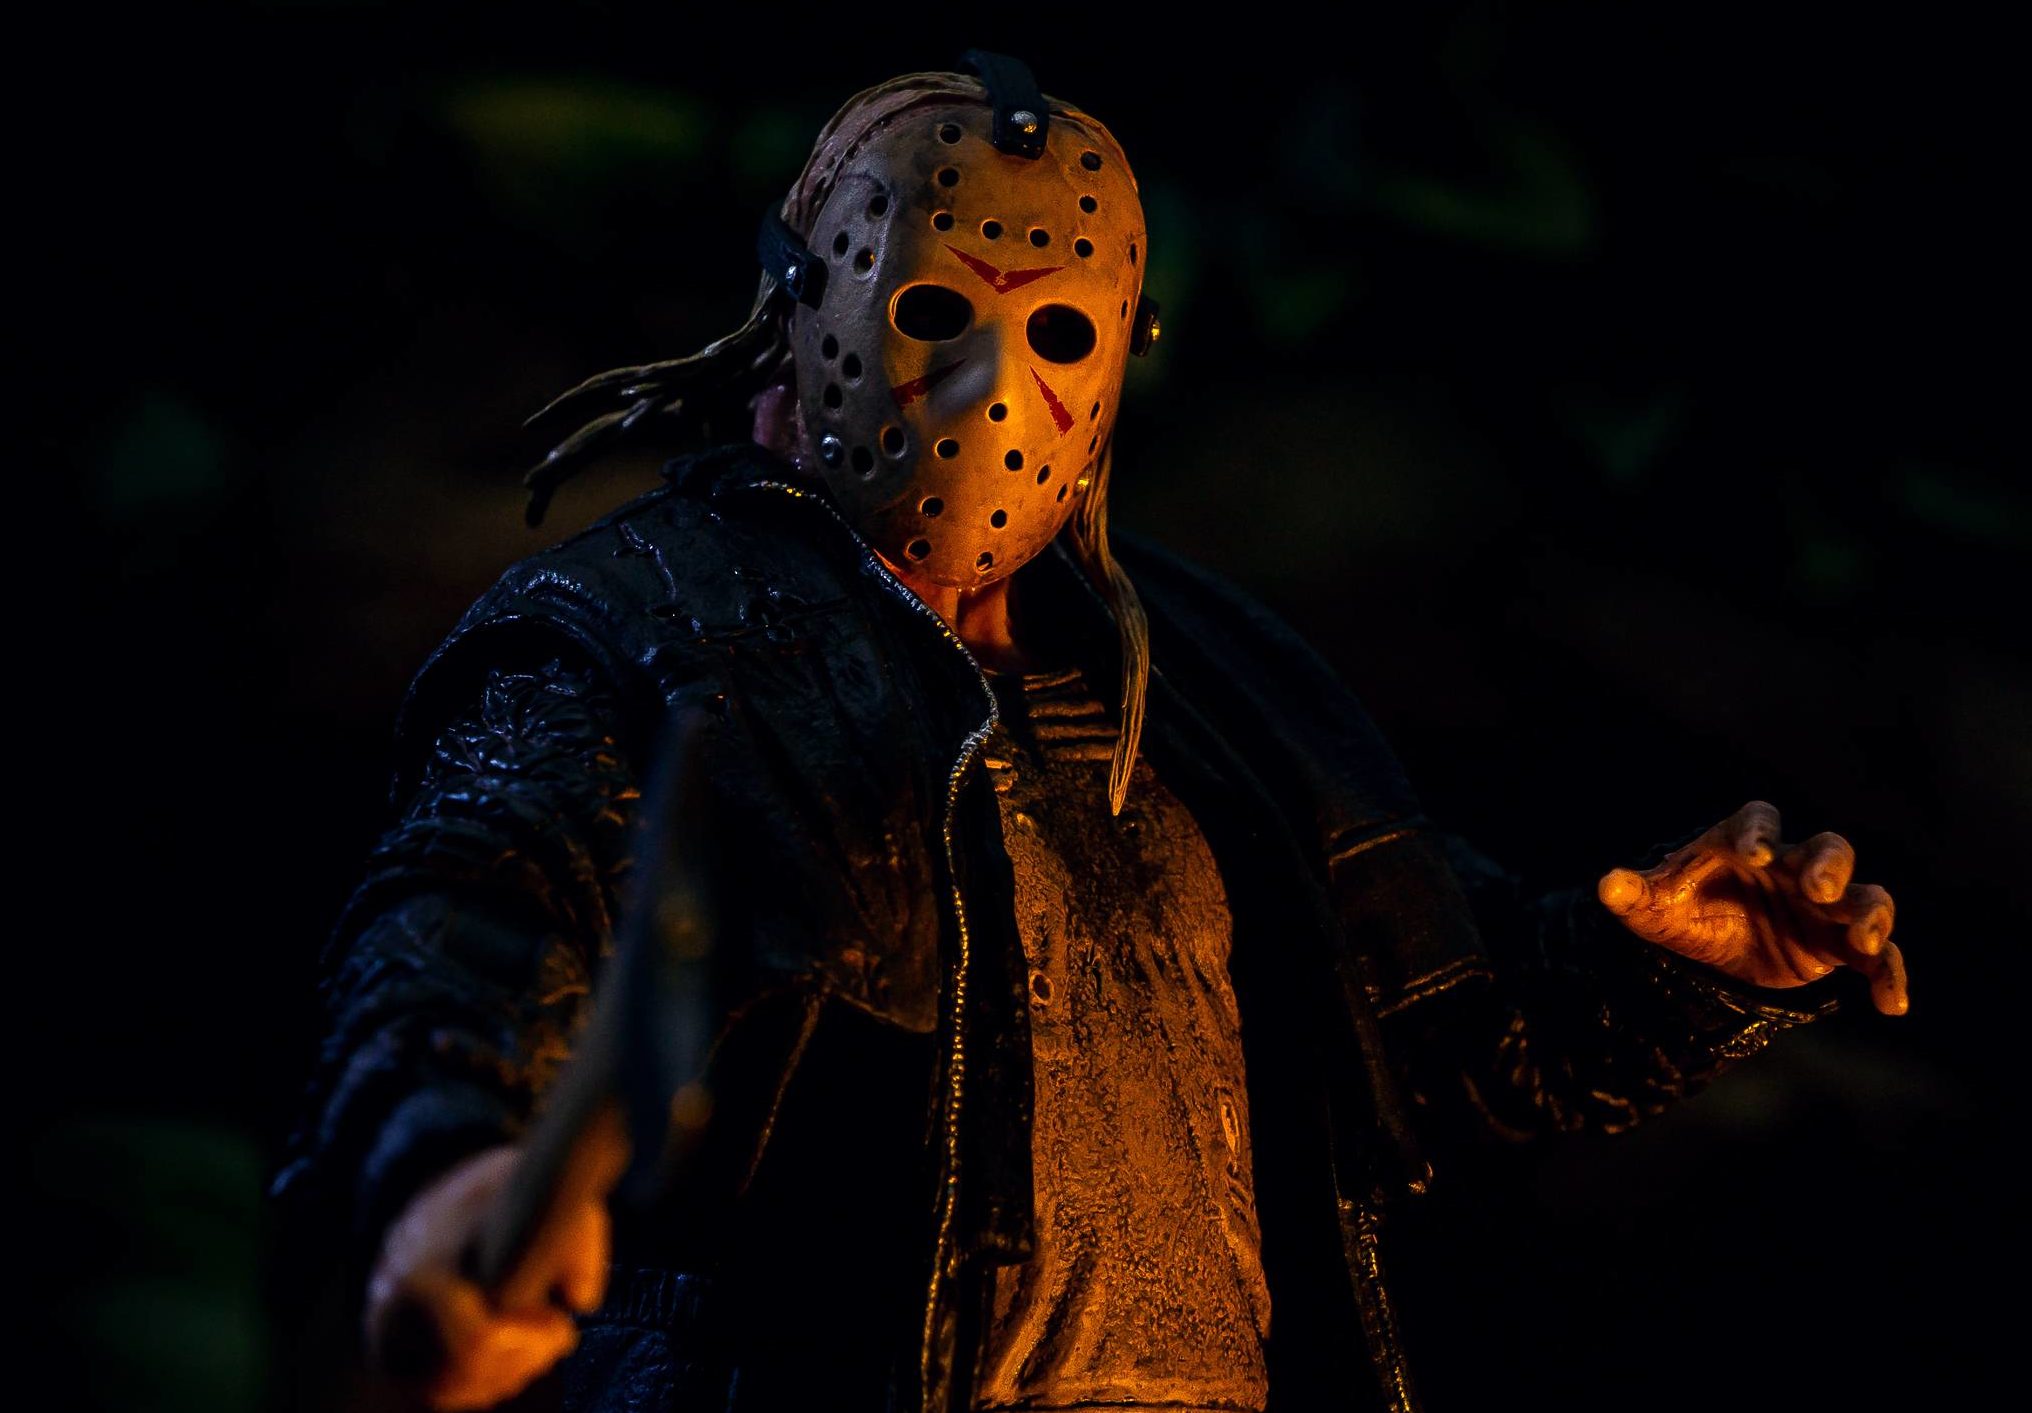 Pics of jason from friday the 13th 👉 👌 Would You Try The Jas